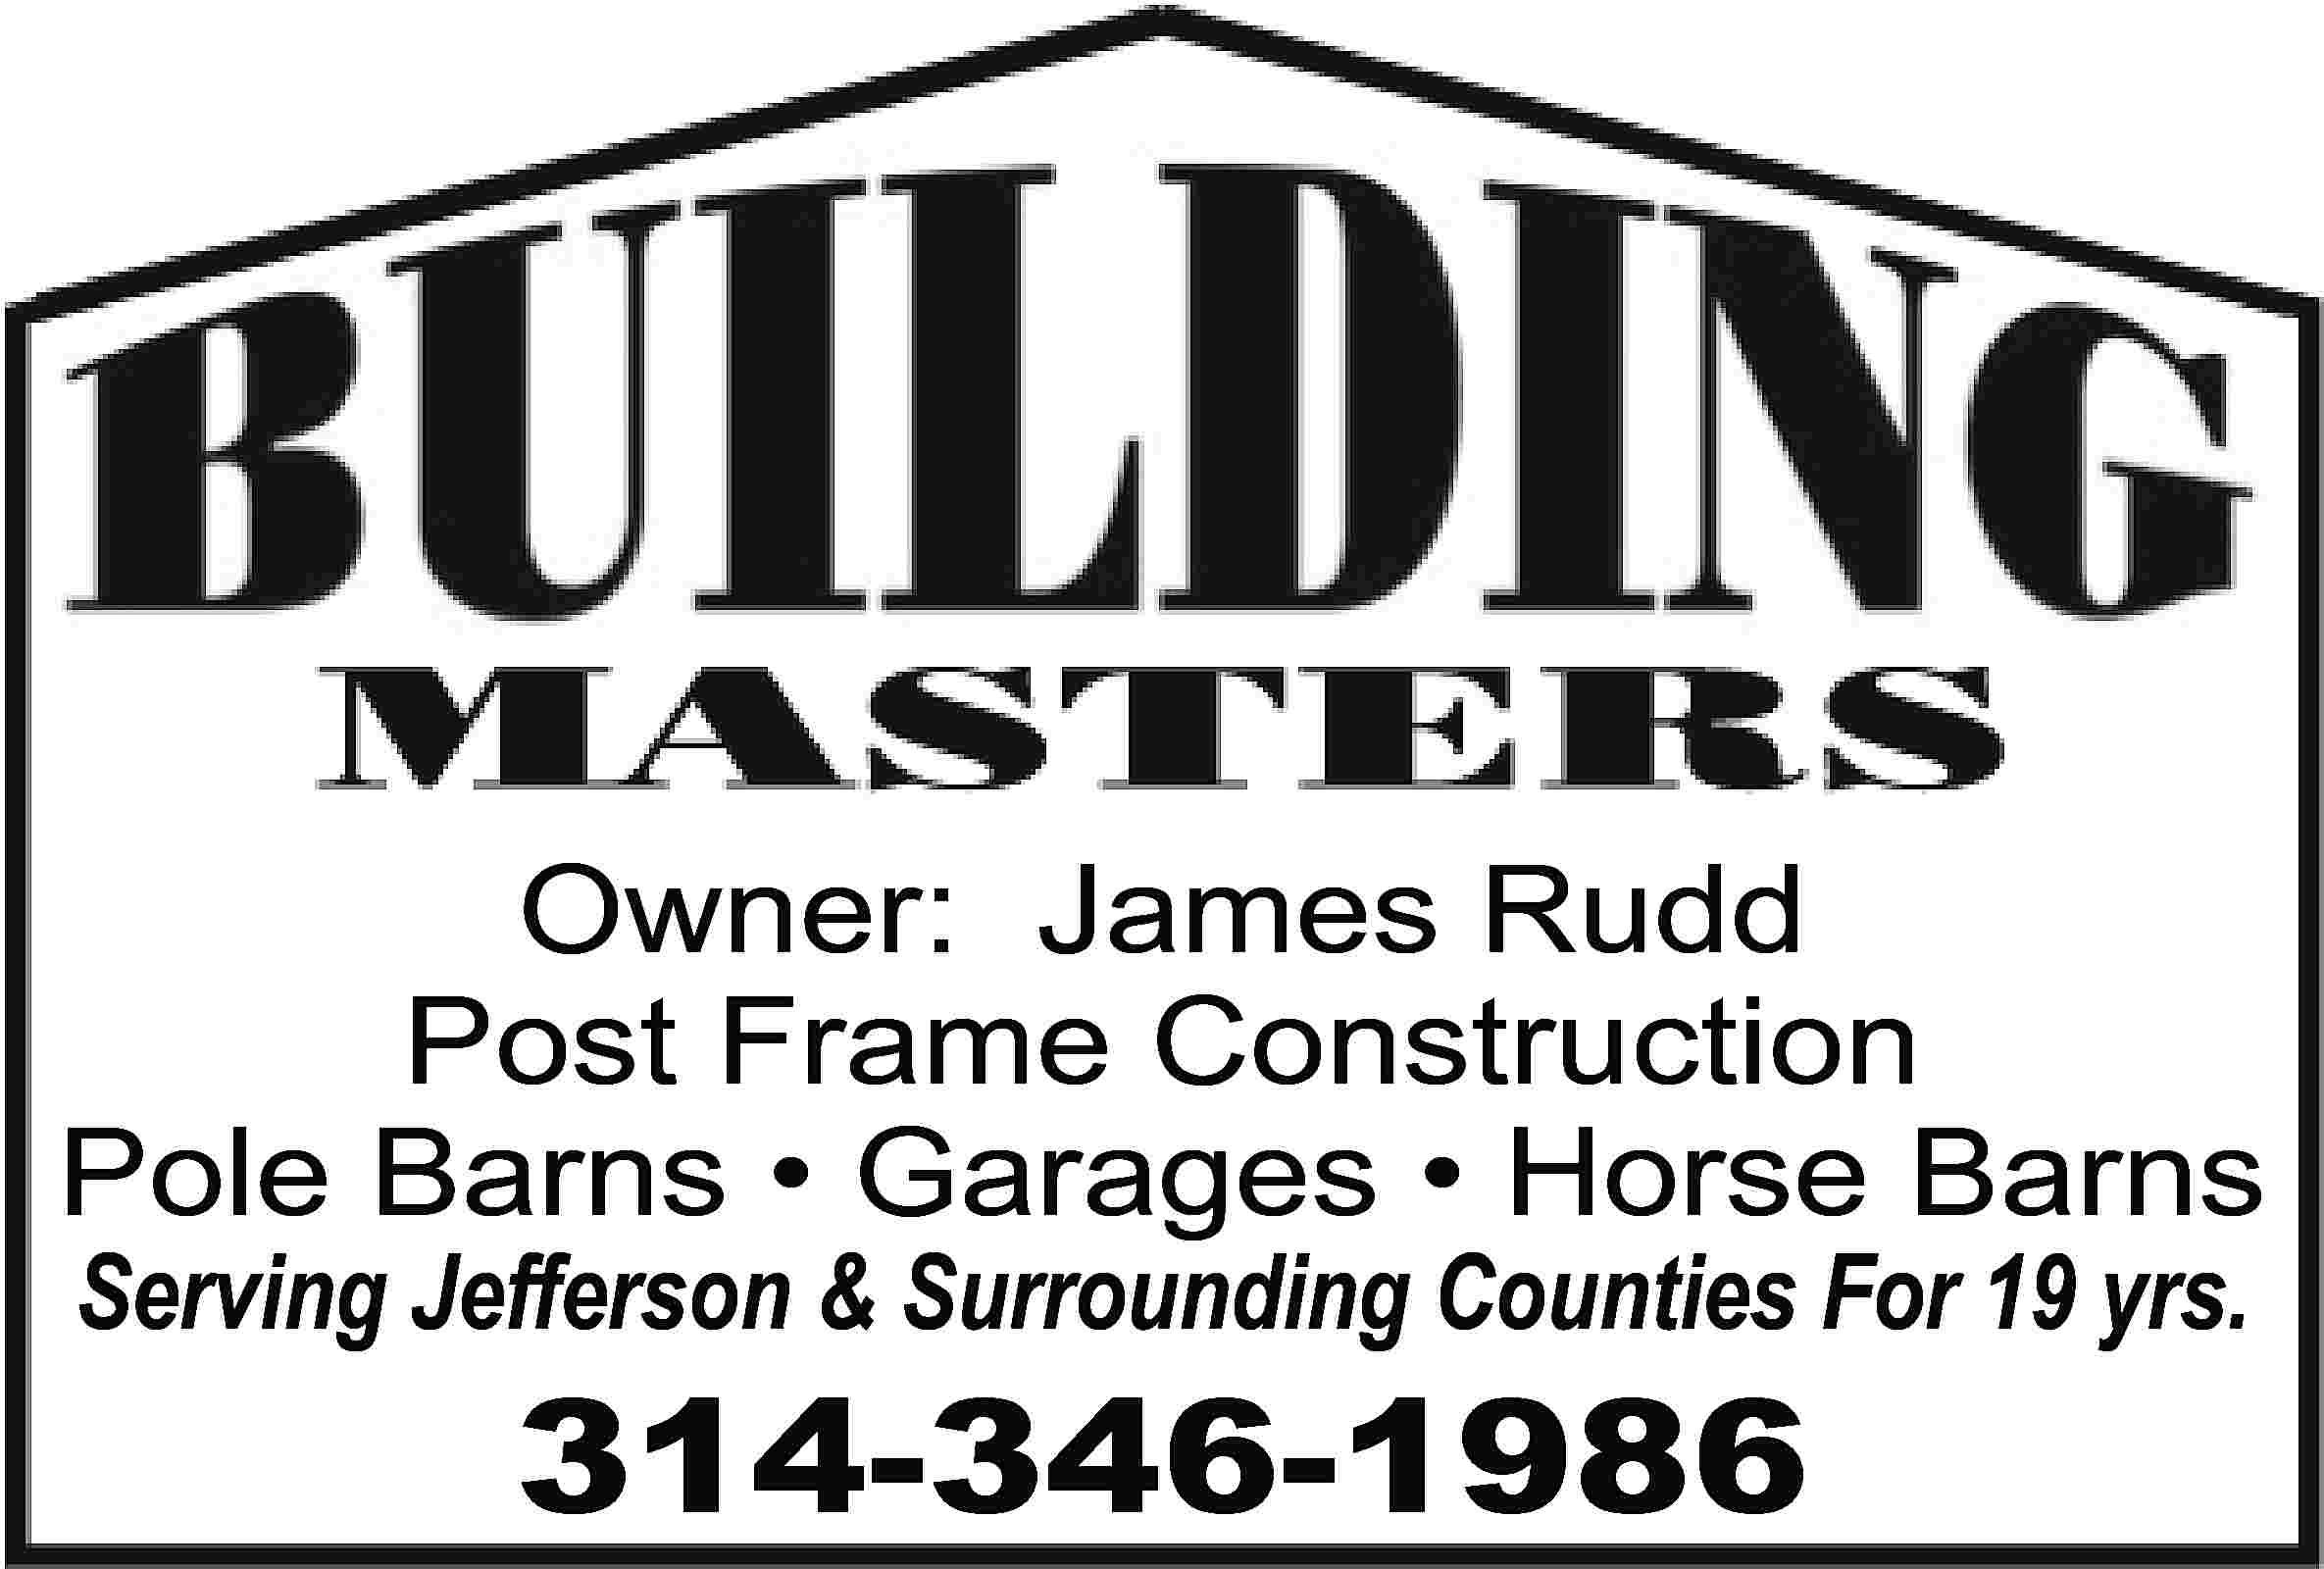 Owner: James Rudd Post Frame  Owner: James Rudd Post Frame Construction Pole Barns • Garages • Horse Barns Serving Jefferson & Surrounding Counties For 19 yrs. 314-346-1986